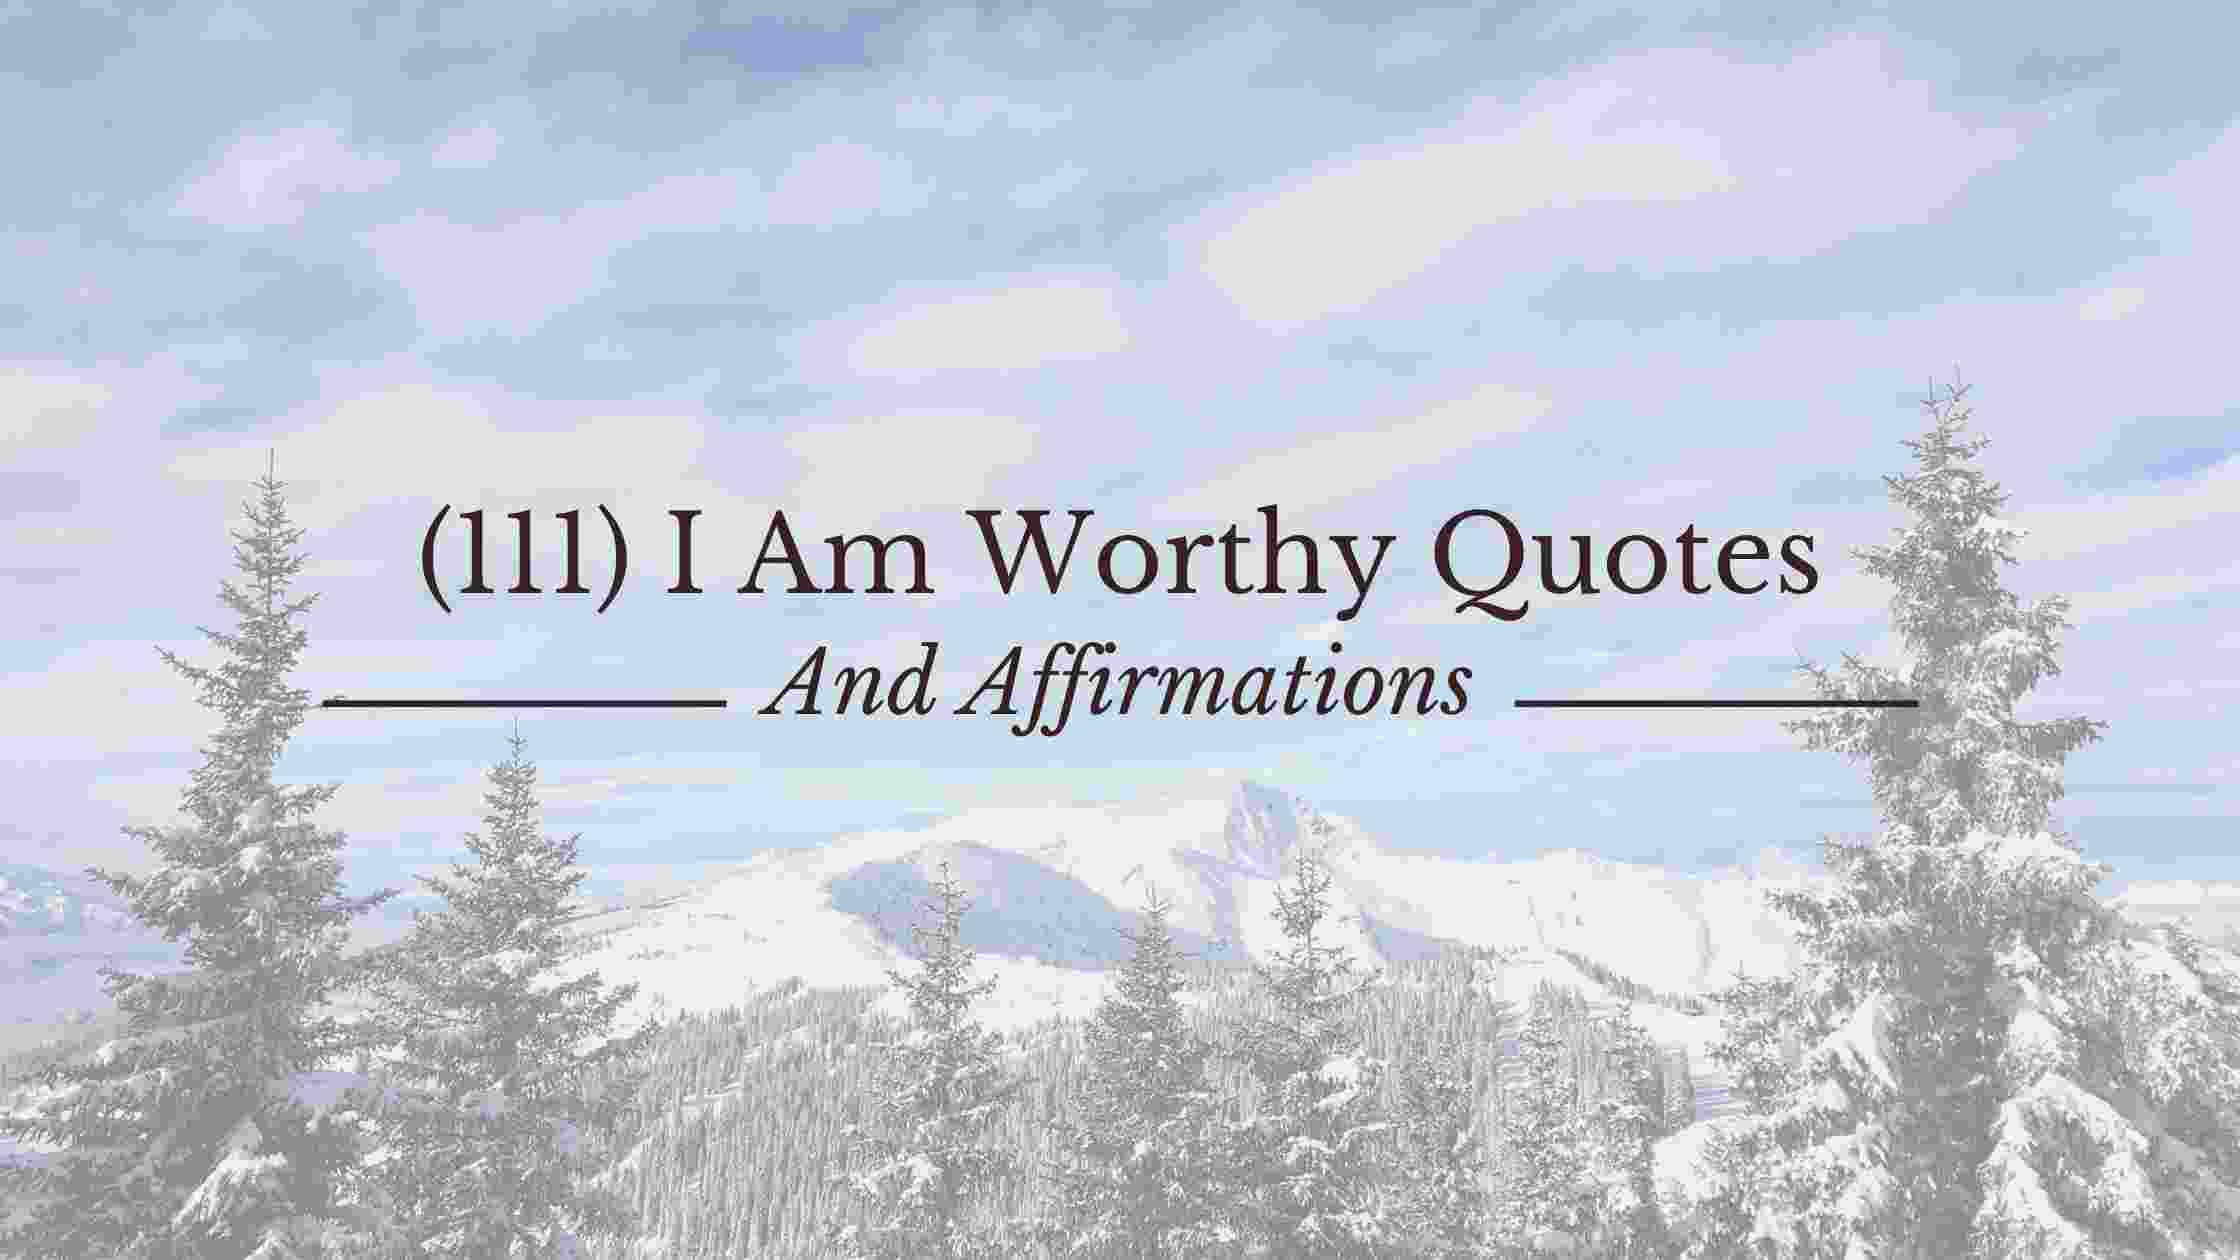 Feeling worthy is a powerful affirmation to embrace.Here are some affirmations for you when you are feeling less than worthy.